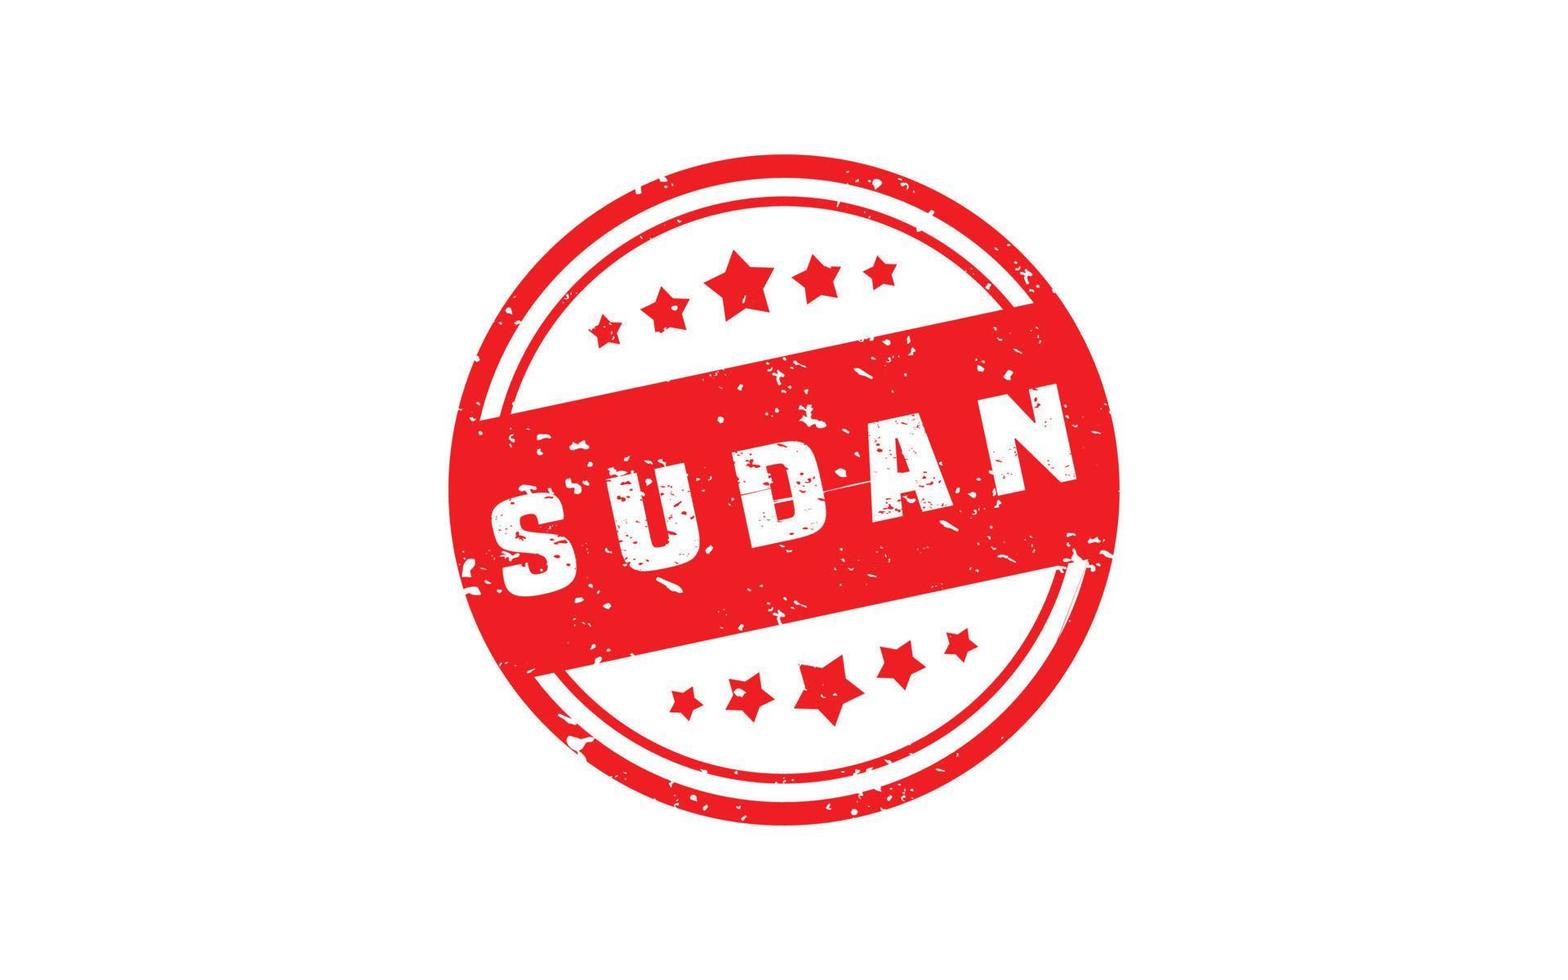 SUDAN stamp rubber with grunge style on white background vector